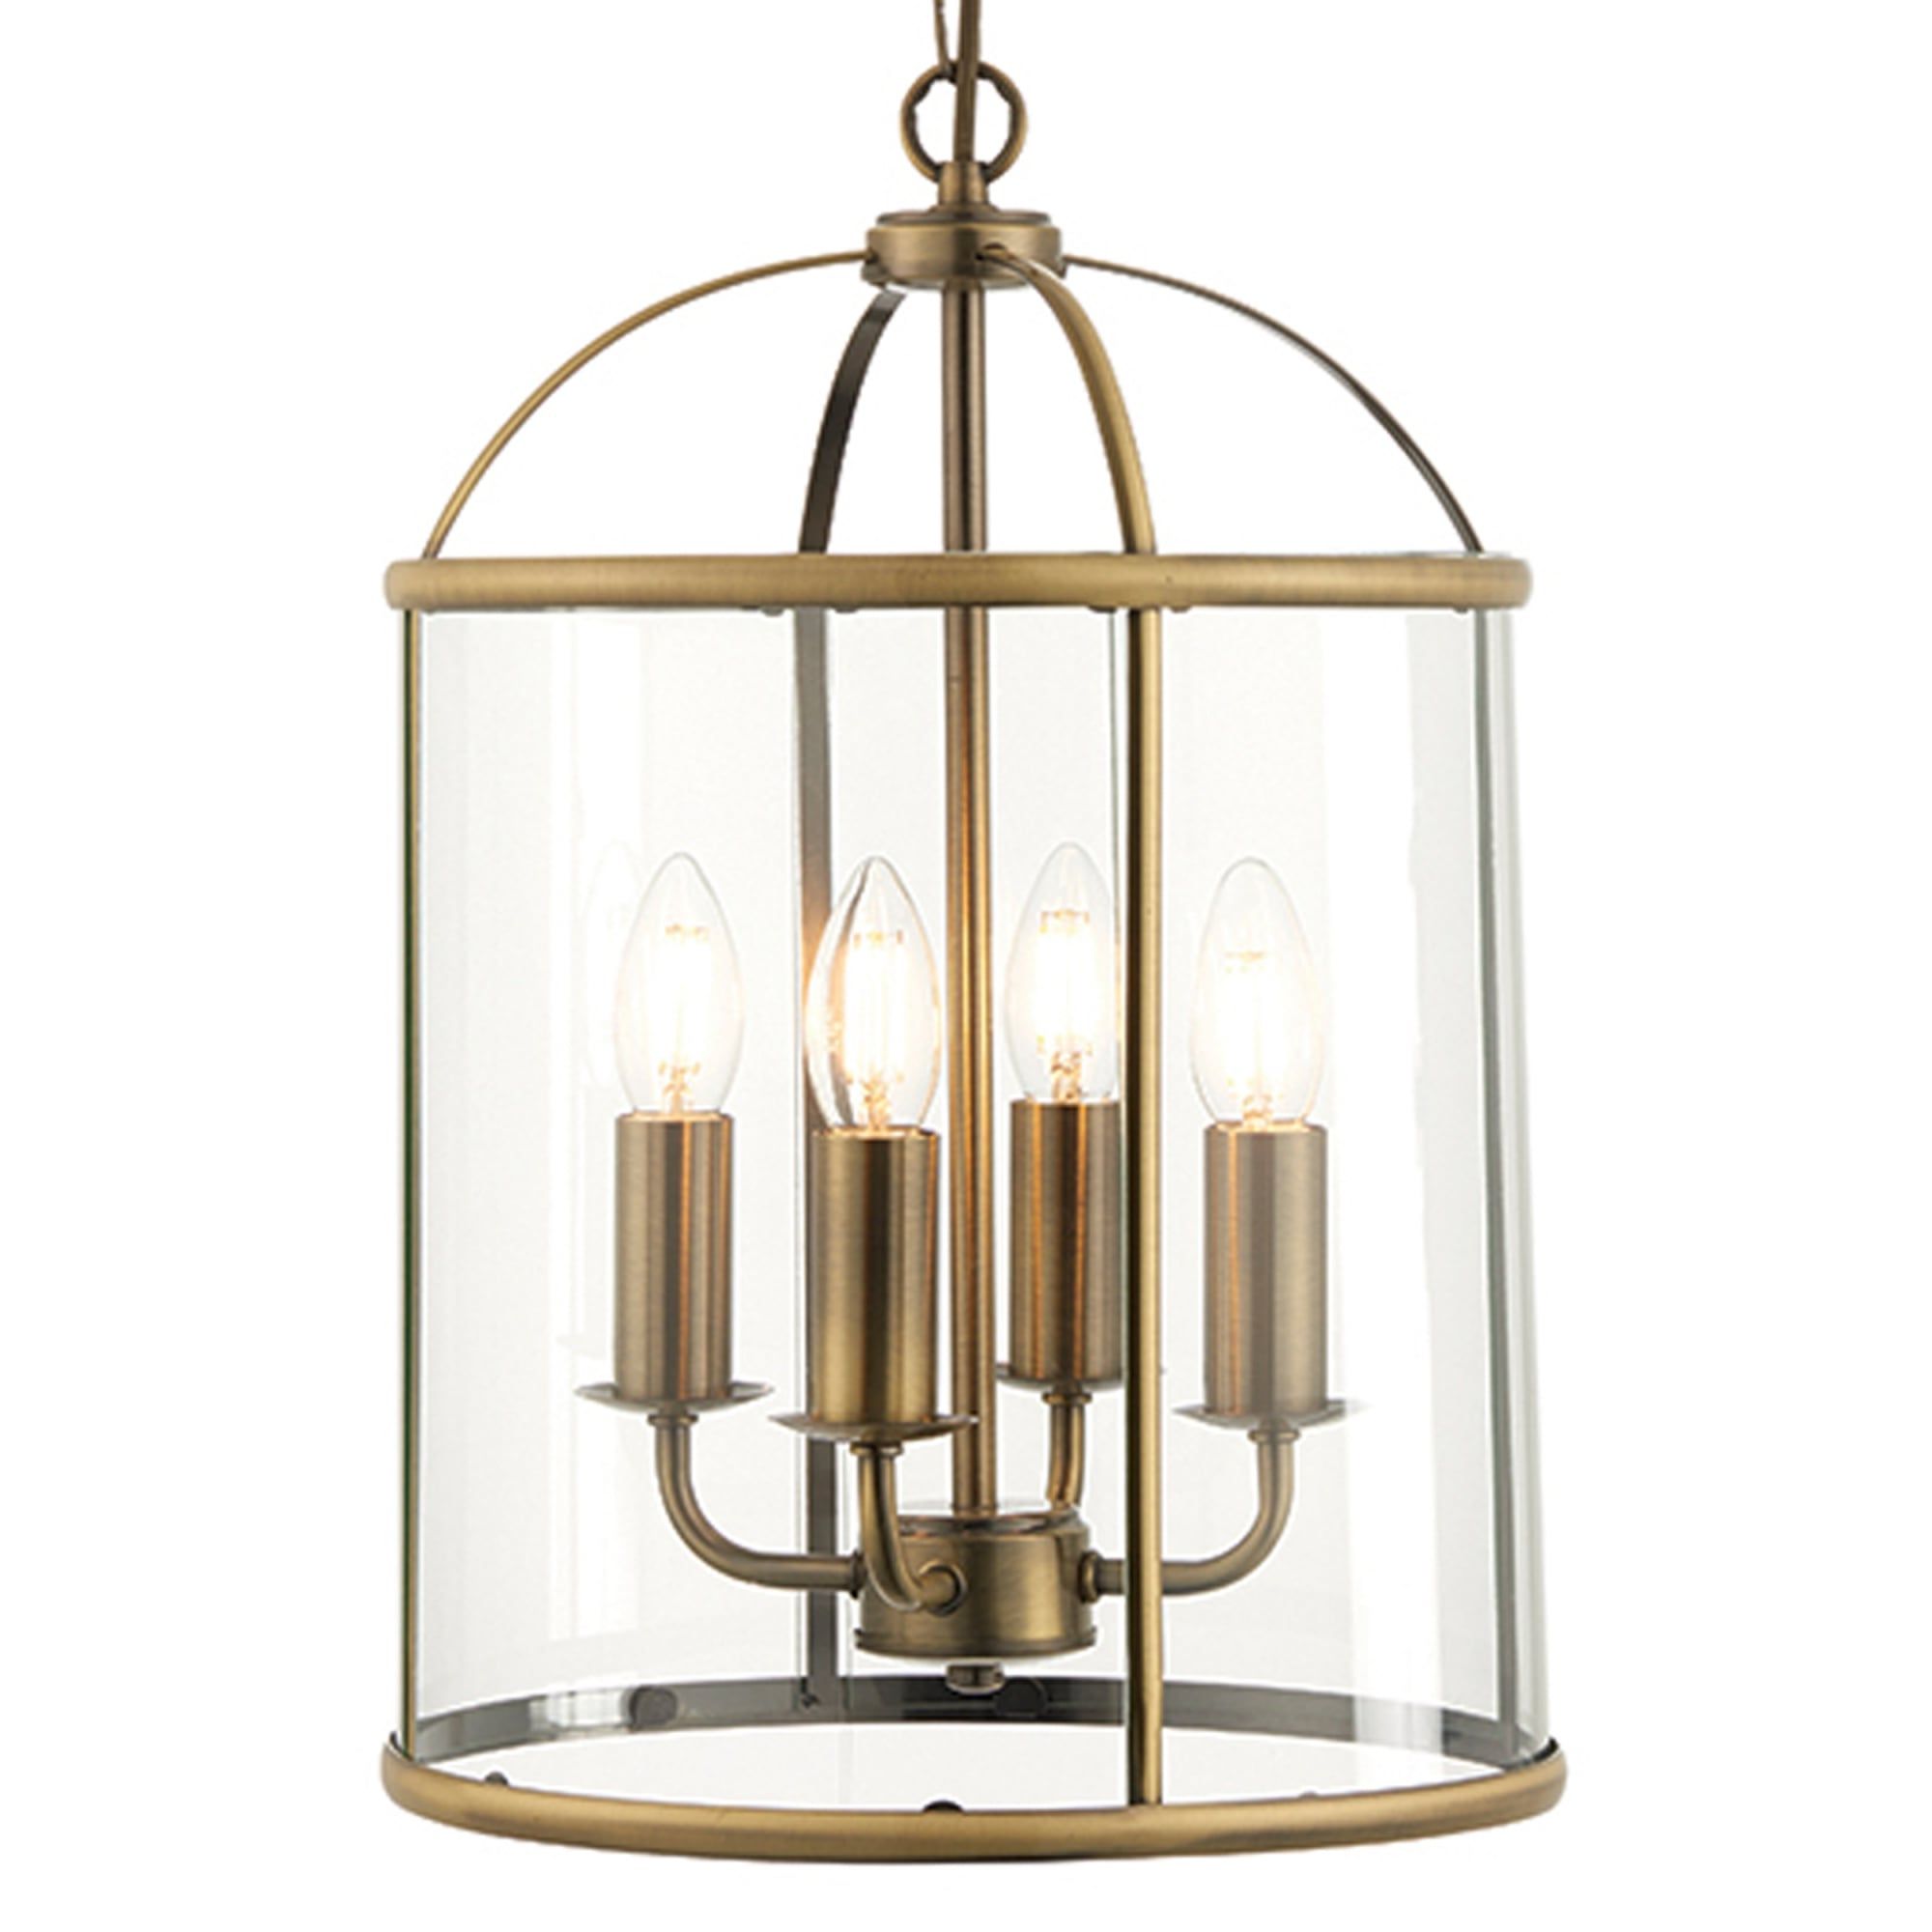 Popular Four Light Lantern Chandeliers Within Endon 69455 Lambeth 4 Light Antique Brass And Glass Lantern Pendant (View 7 of 15)